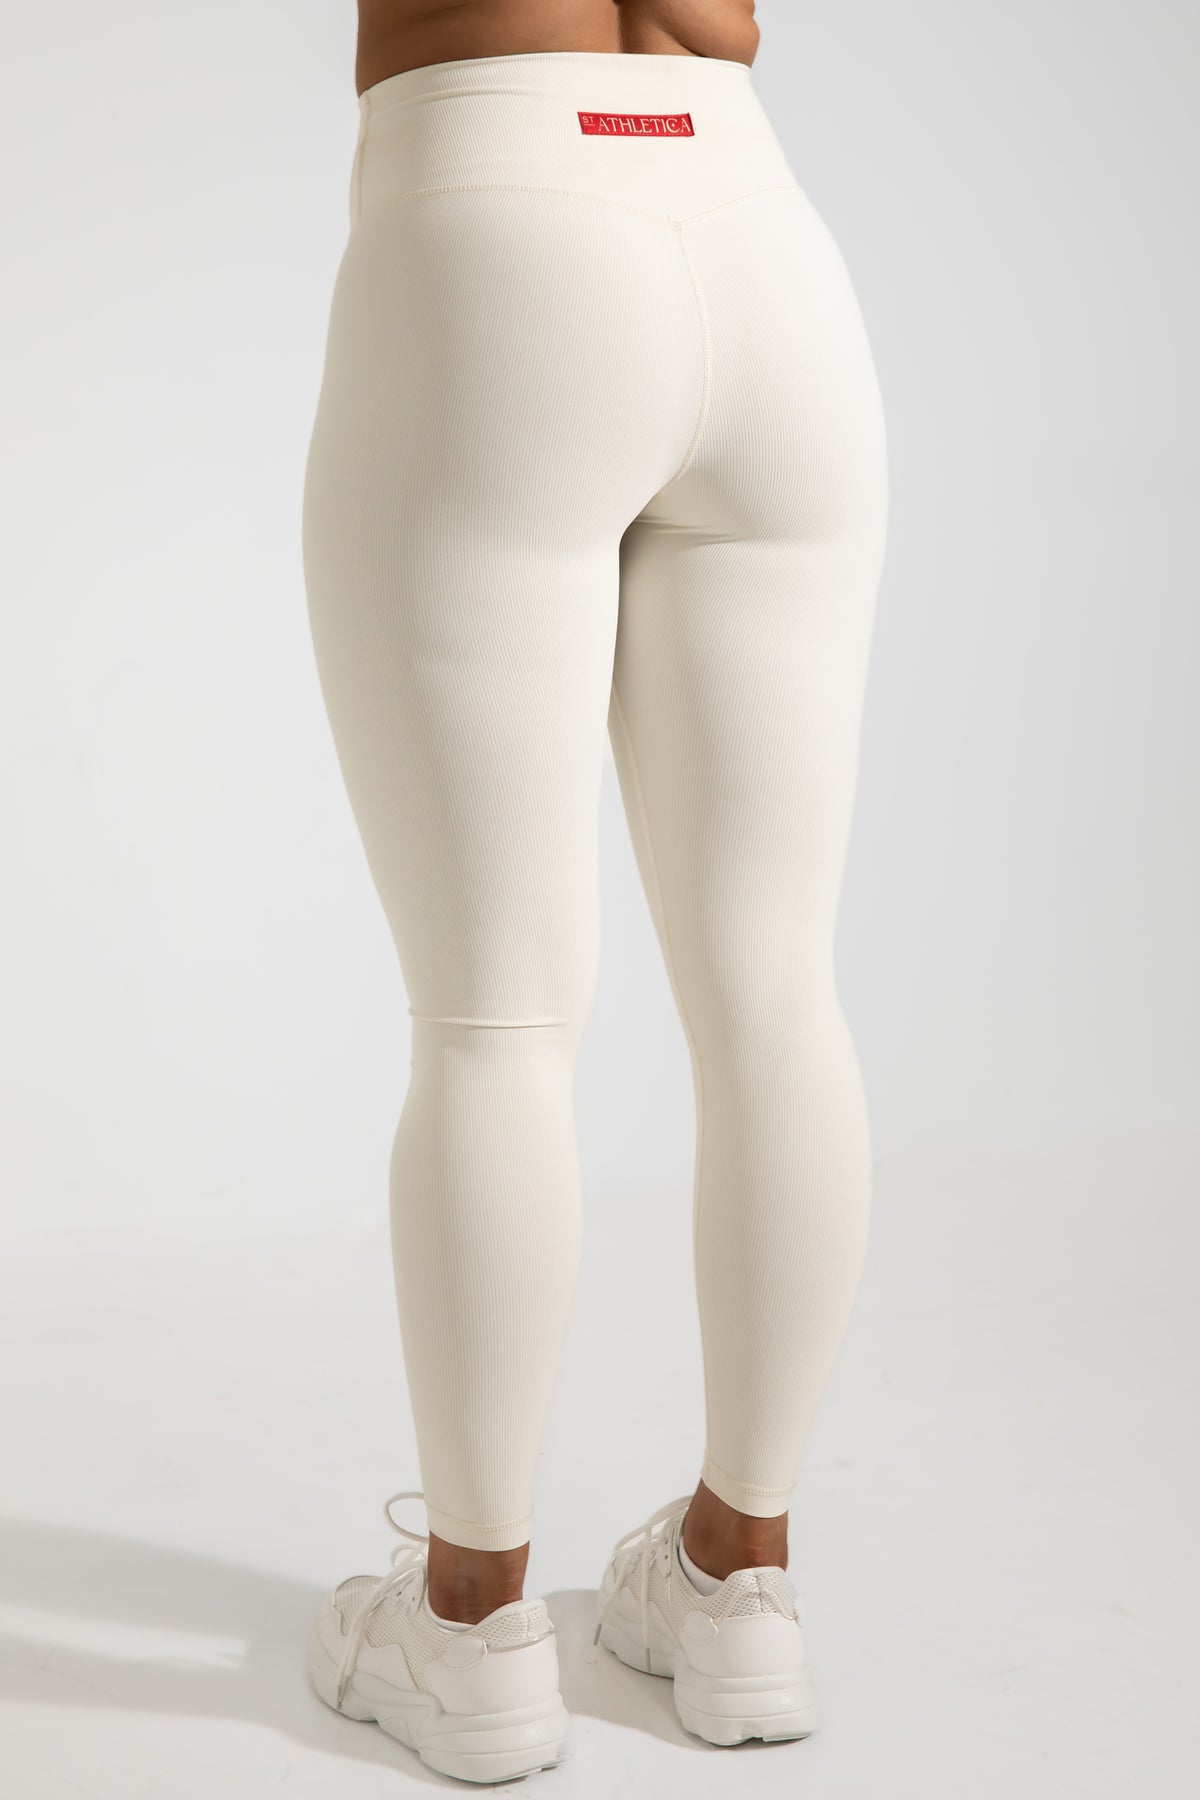 st athletica white tights 